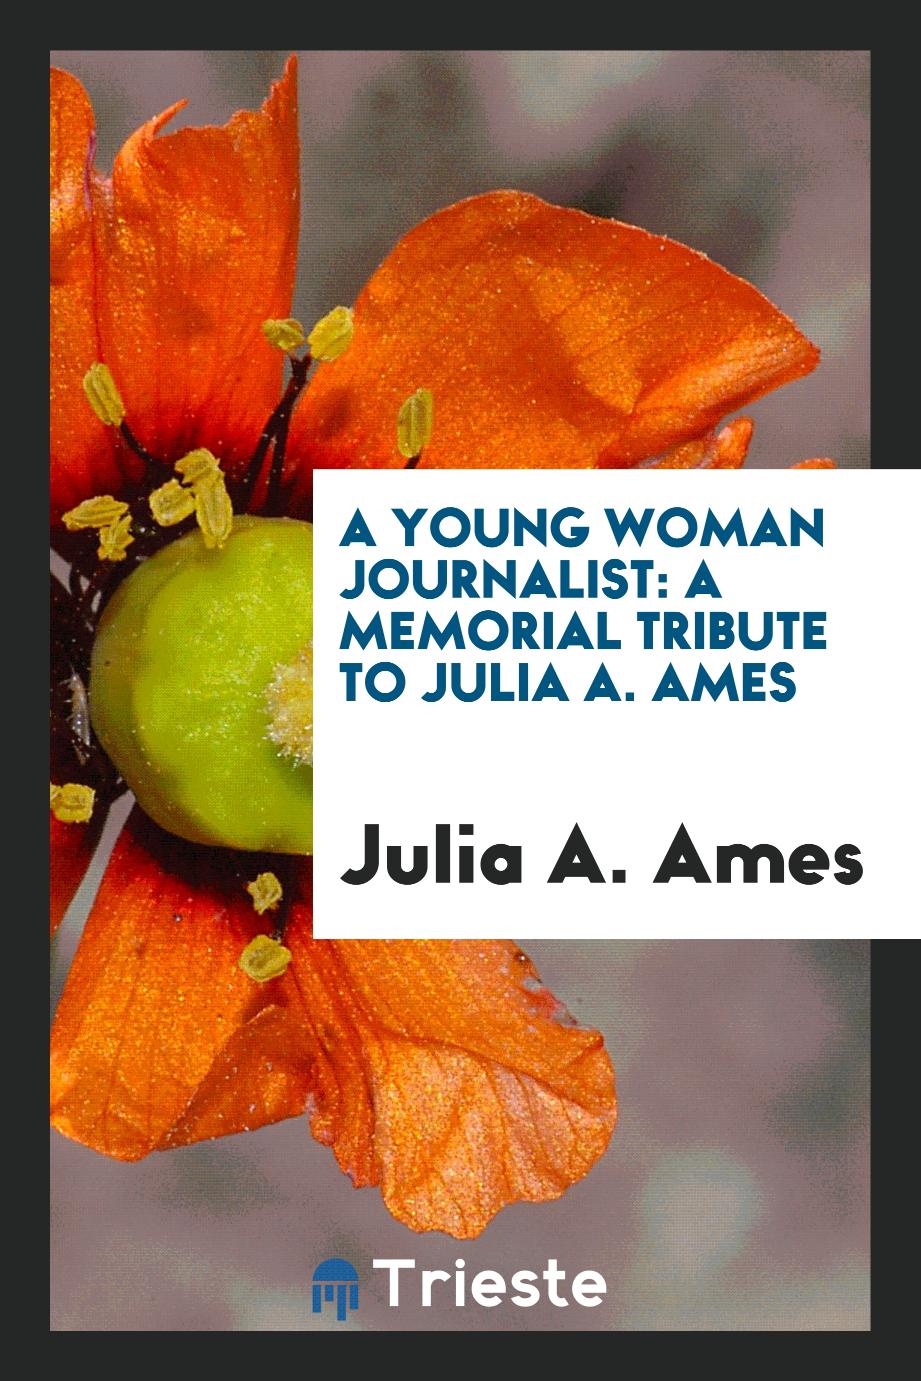 A Young woman journalist: a memorial tribute to Julia A. Ames